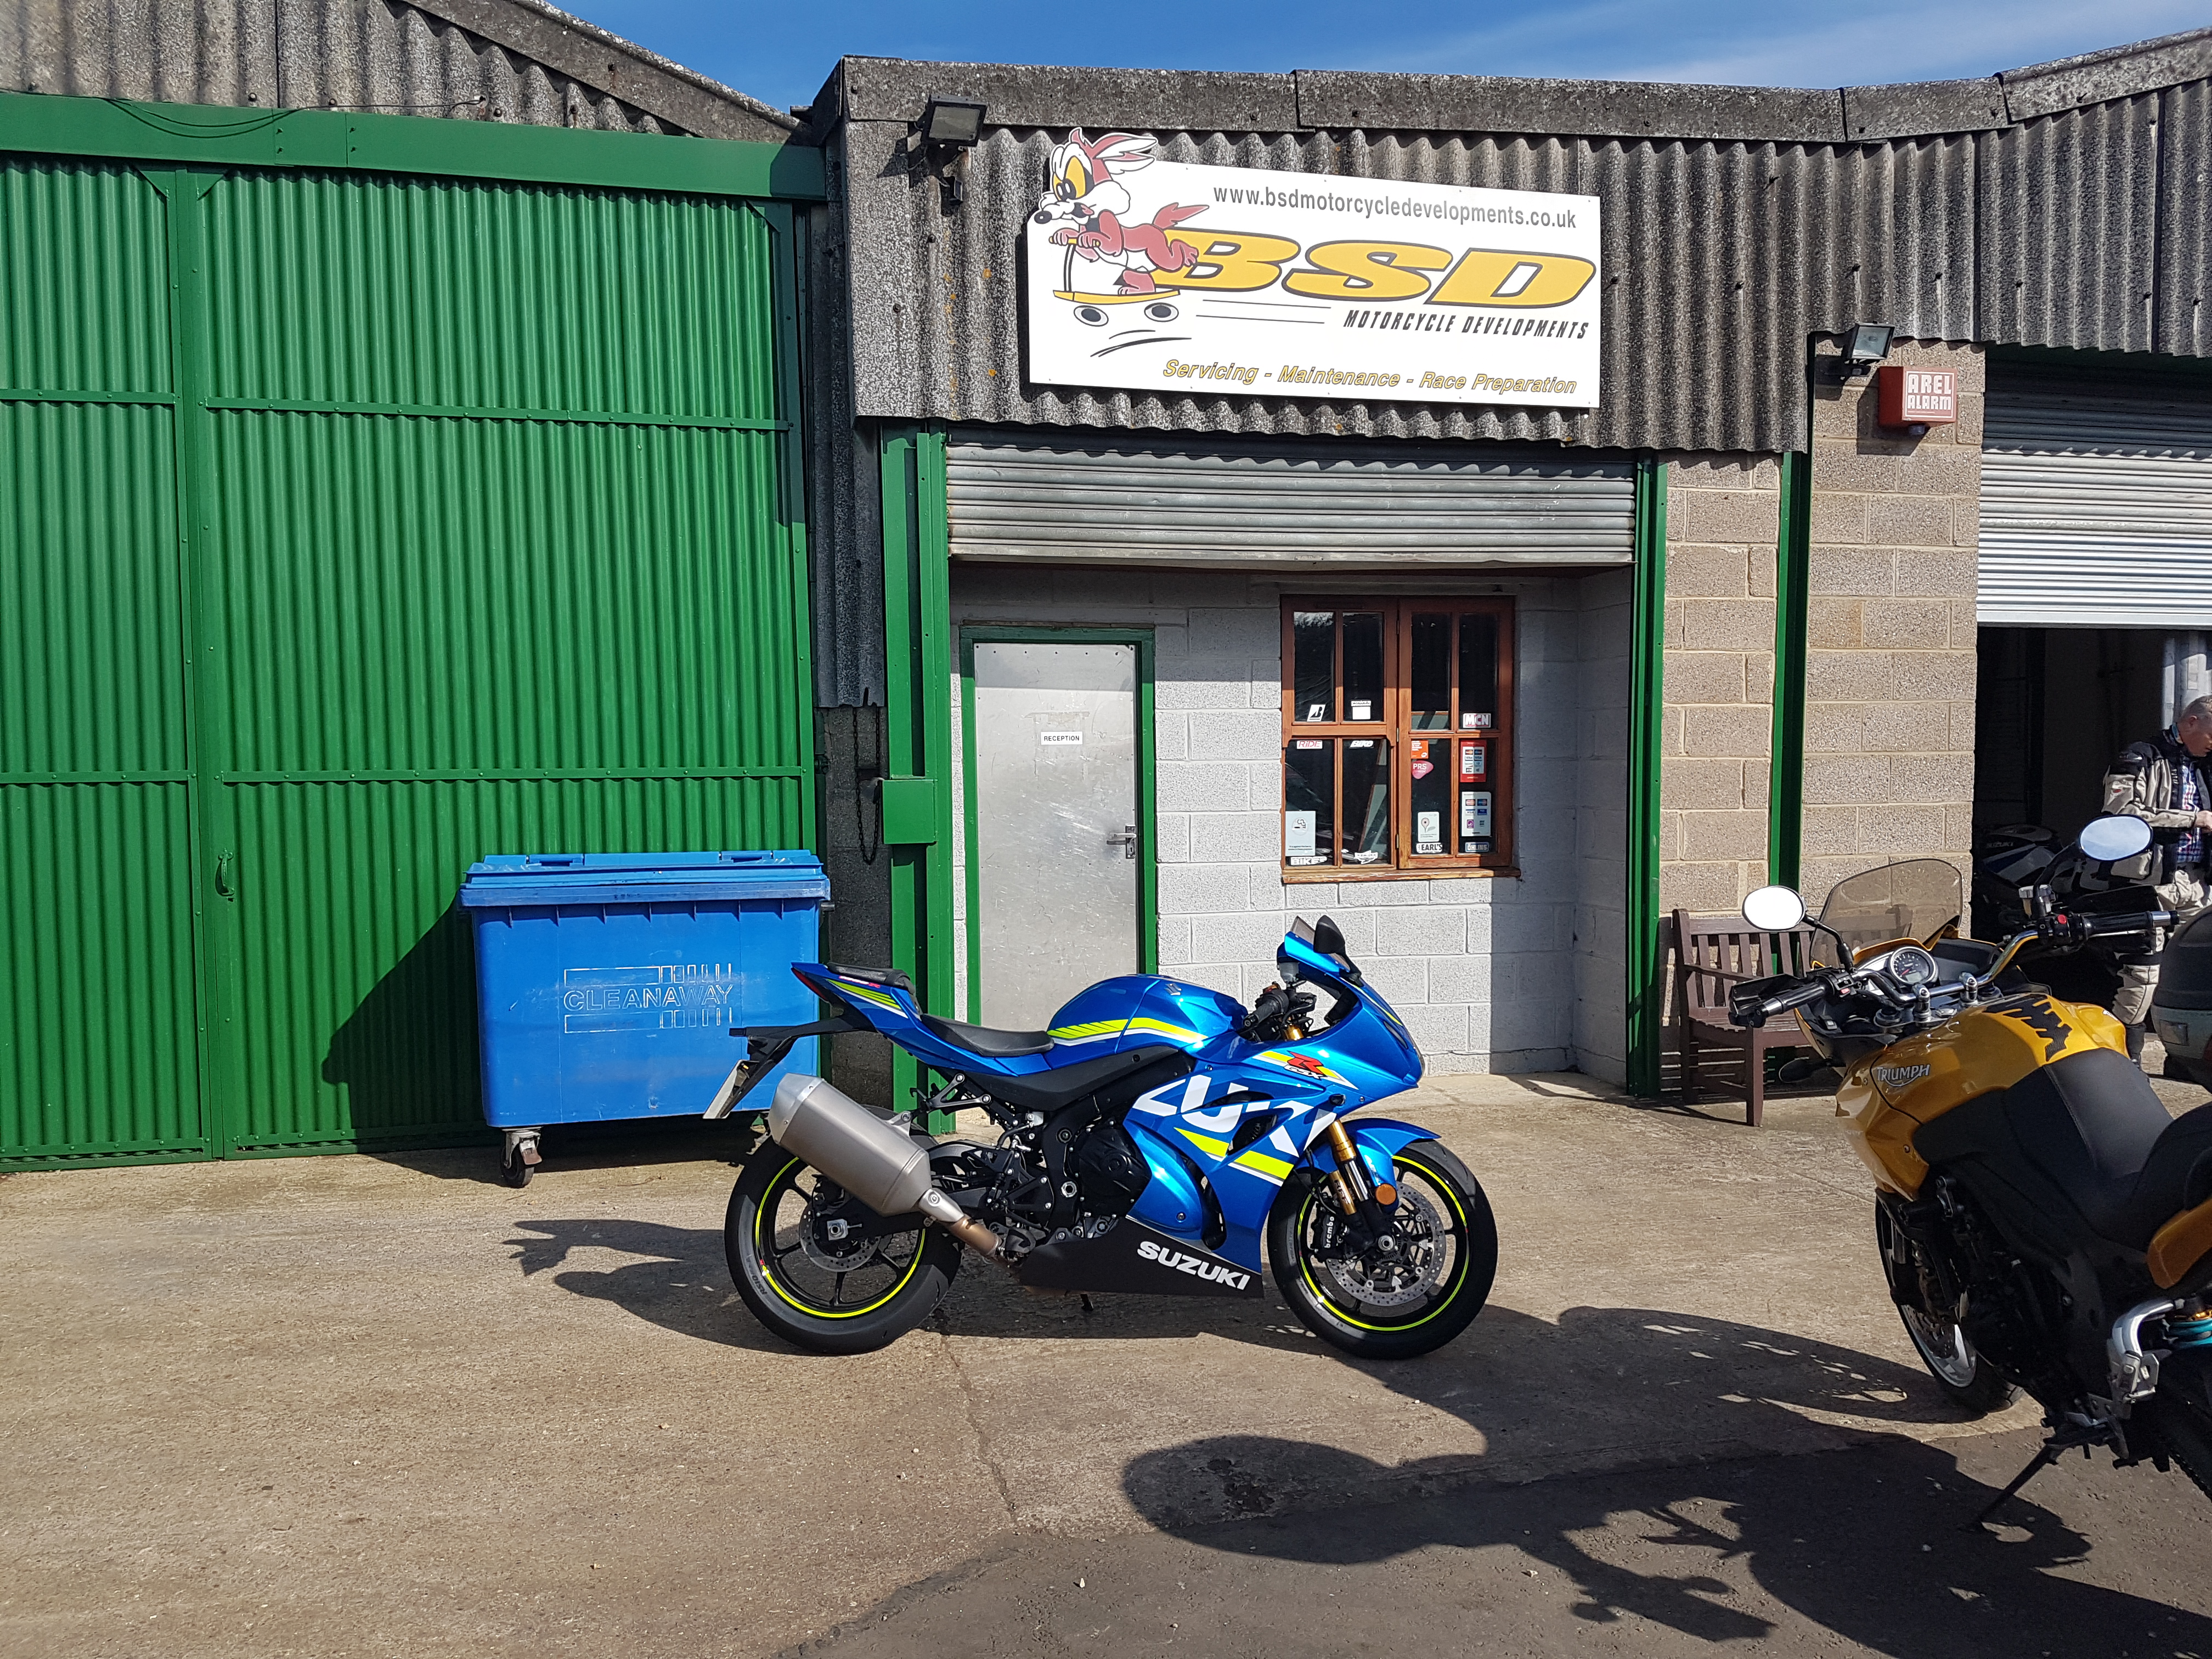 Suzuki GSX-R1000L7 ECU remap – with a full system 185bhp to just shy of 200bhp and all restrictions dealt with!